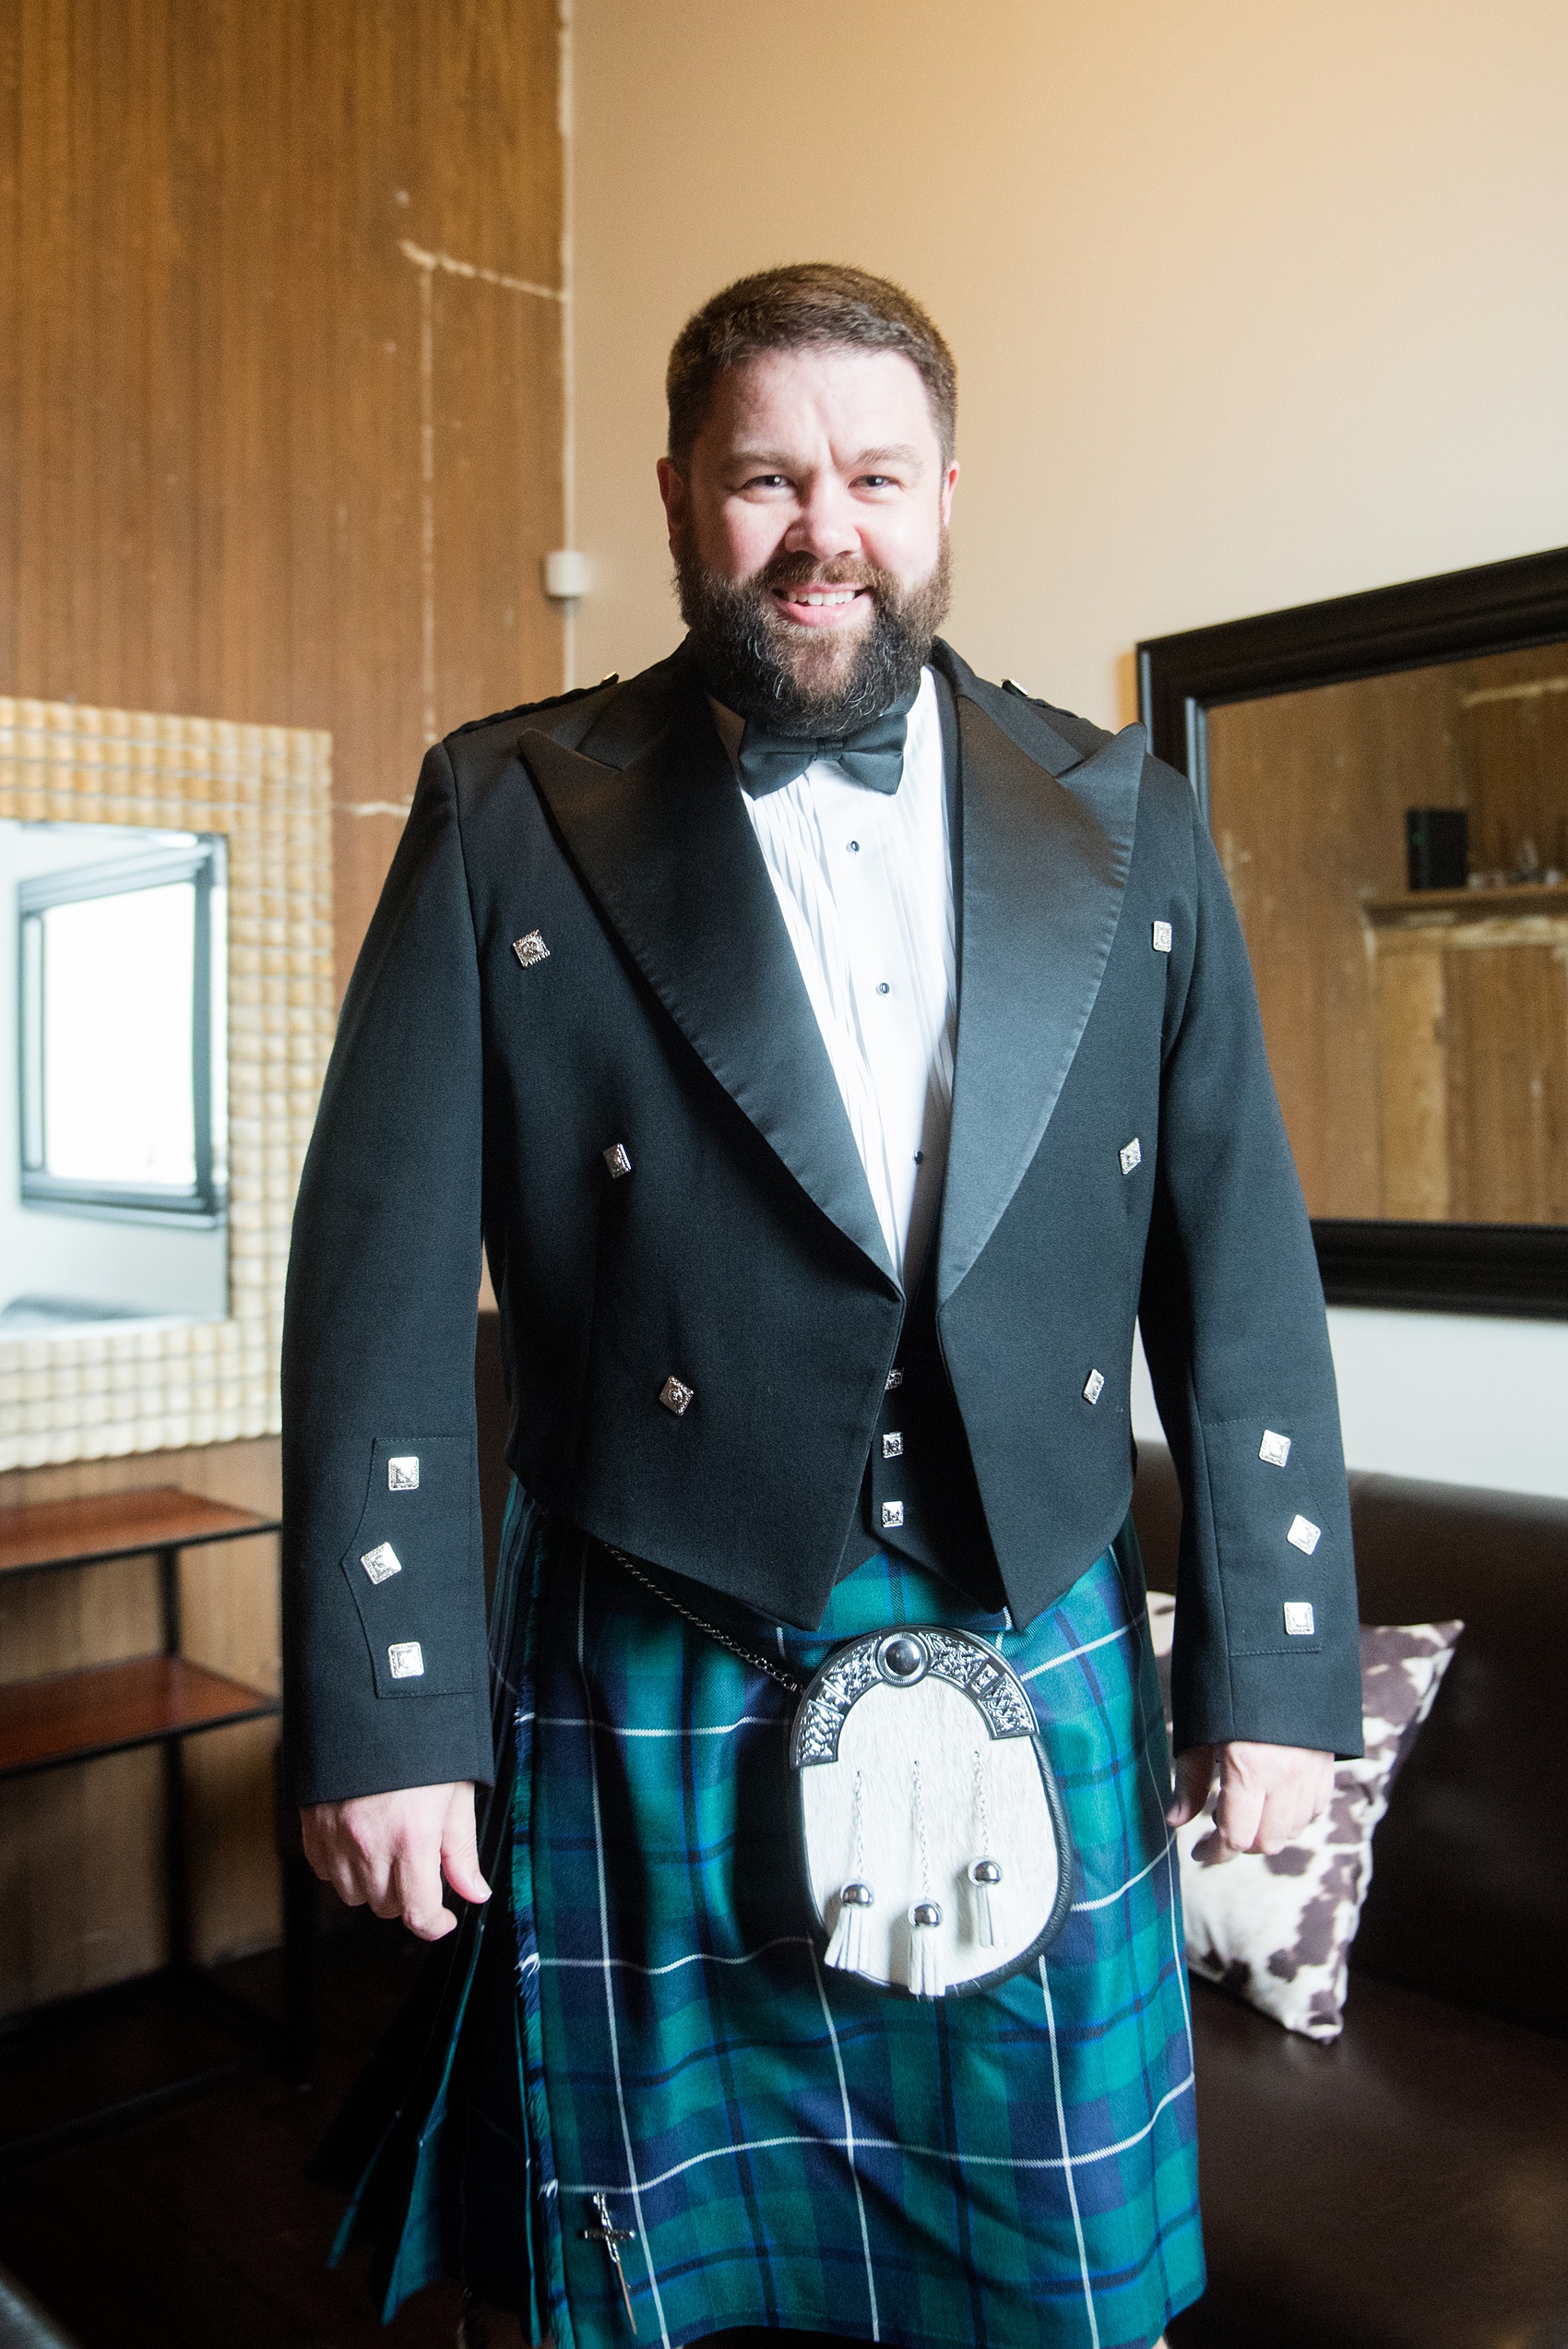 Mikkel Paige Photography captures beautiful groom portraits and his blue + green tartan, Scottish kilt, during his getting ready time before his wedding in Downtown Raleigh, North Carolina. Couple portraits were taken outdoors and the fun event continued inside the unique, historic venue. Click through for all the details from this unique celebration! #MikkelPaige #RaleighWeddingPhotographer #RaleighWeddingVenue #DowntownRaleighWedding #Groom #Kilt #ScottishGroom